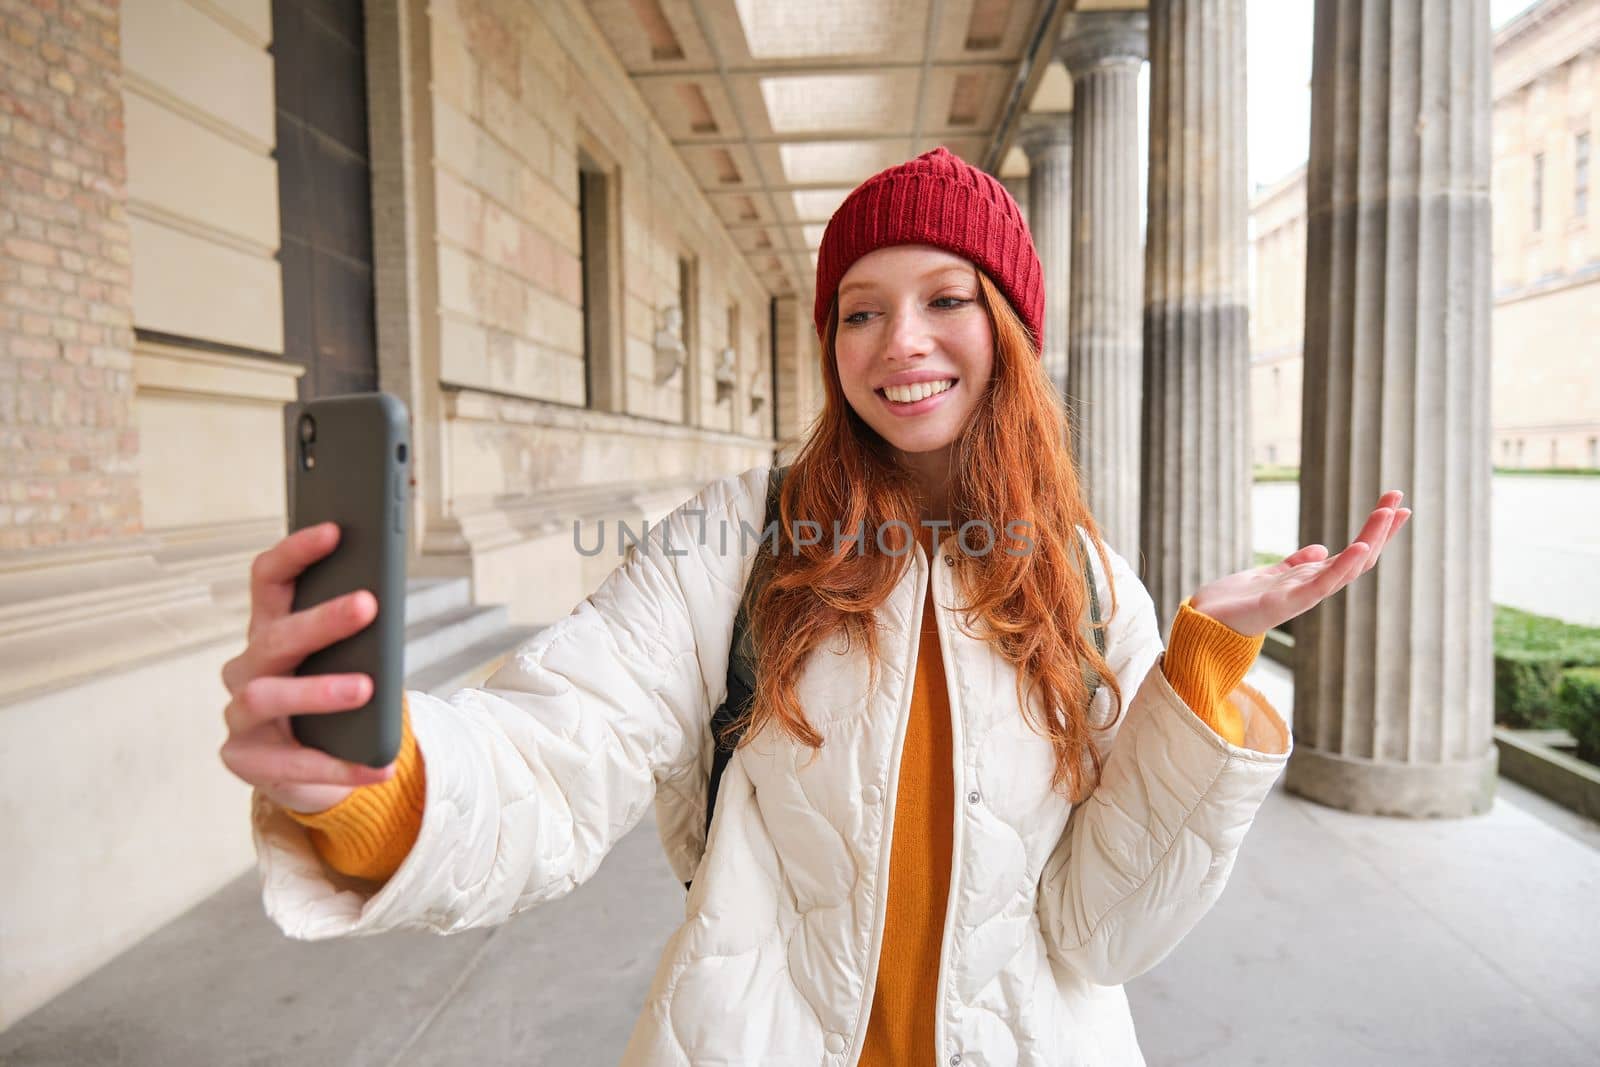 Happy girl tourist demonstrates something on video chat smartphone, shows sightseeing attraction to friend while on mobile phone app call.